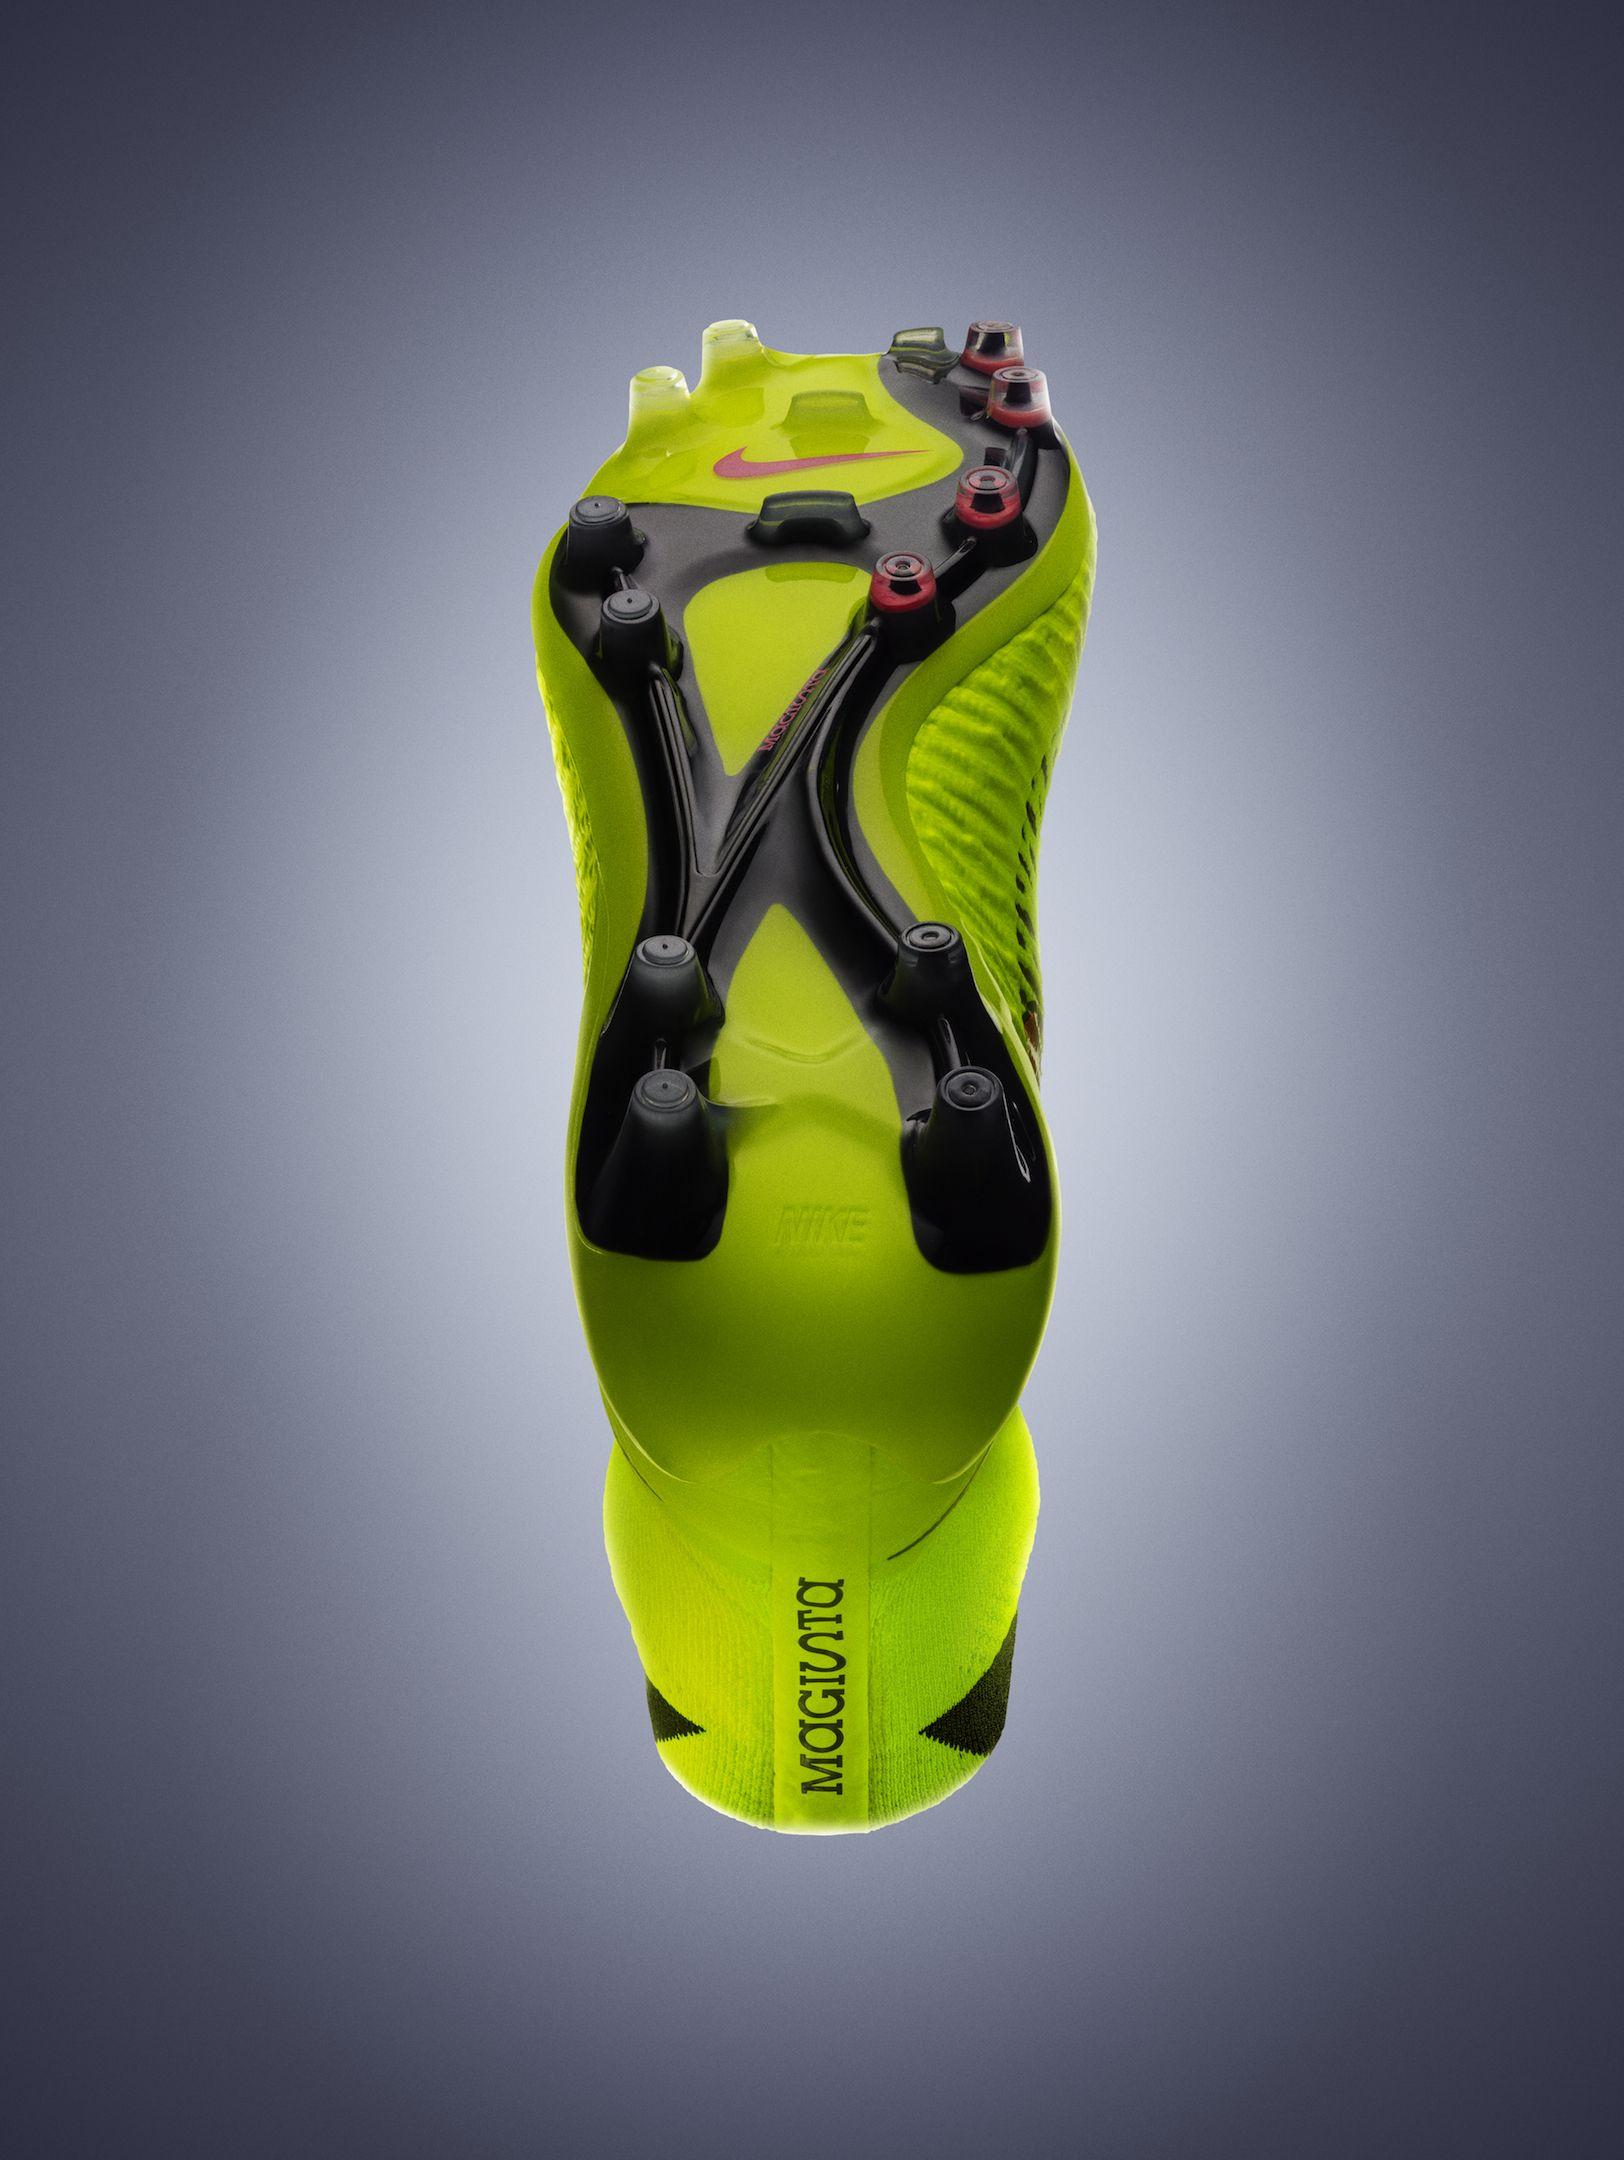 Nike Changes Football Boots Forever with New Magista. Digital News